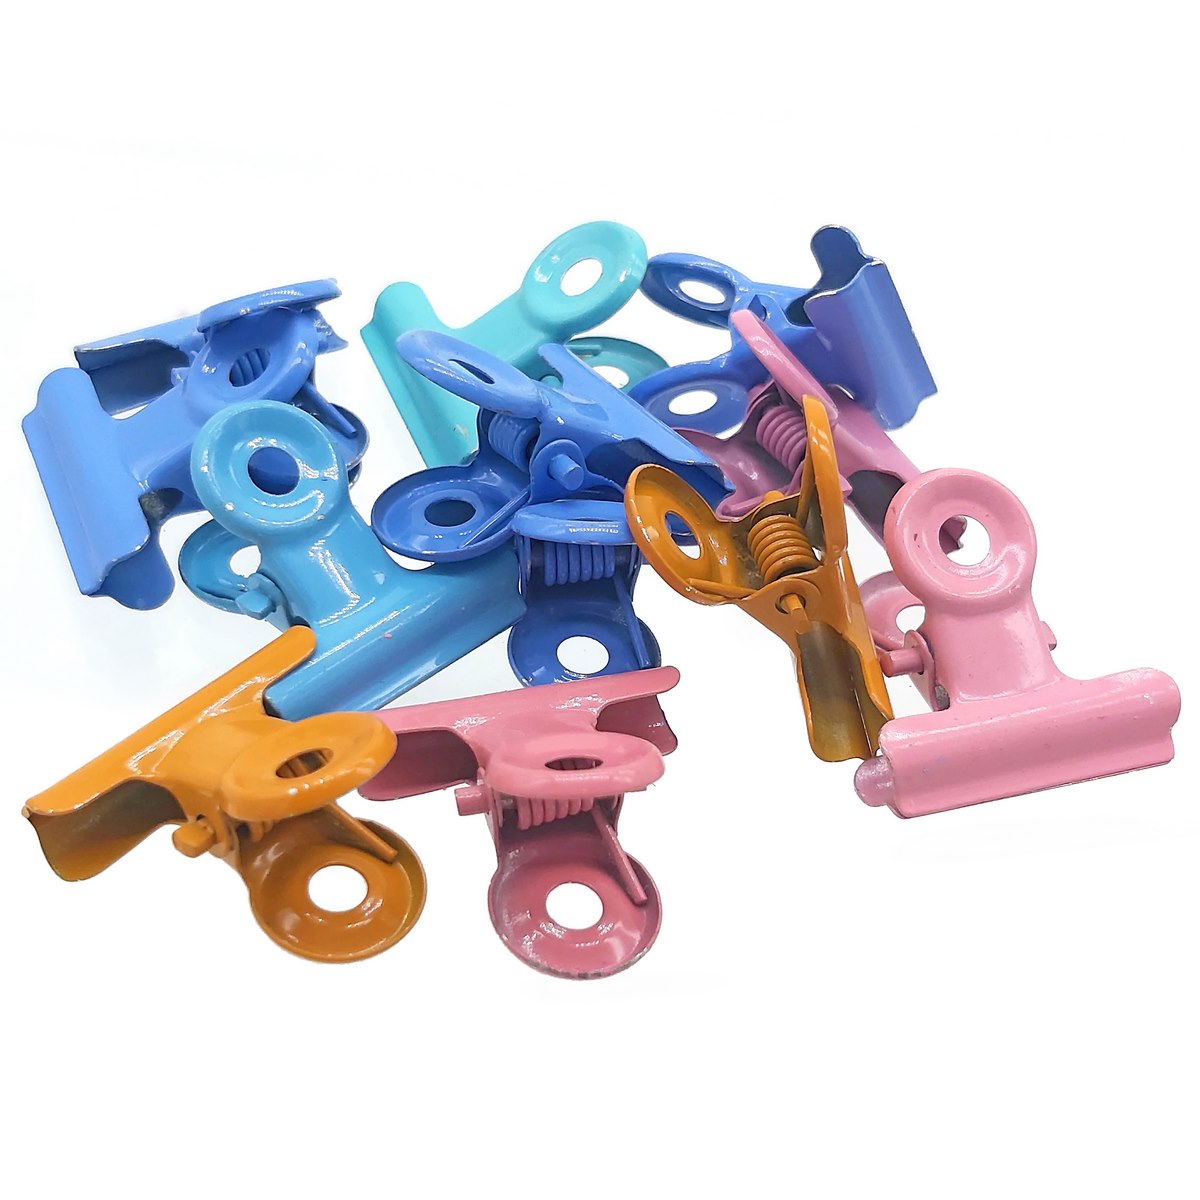 jags-mumbai Clip VividClip: 15mm Colorful Metal Bulldog Clip - Stylishly Secure Your Documents with Flair